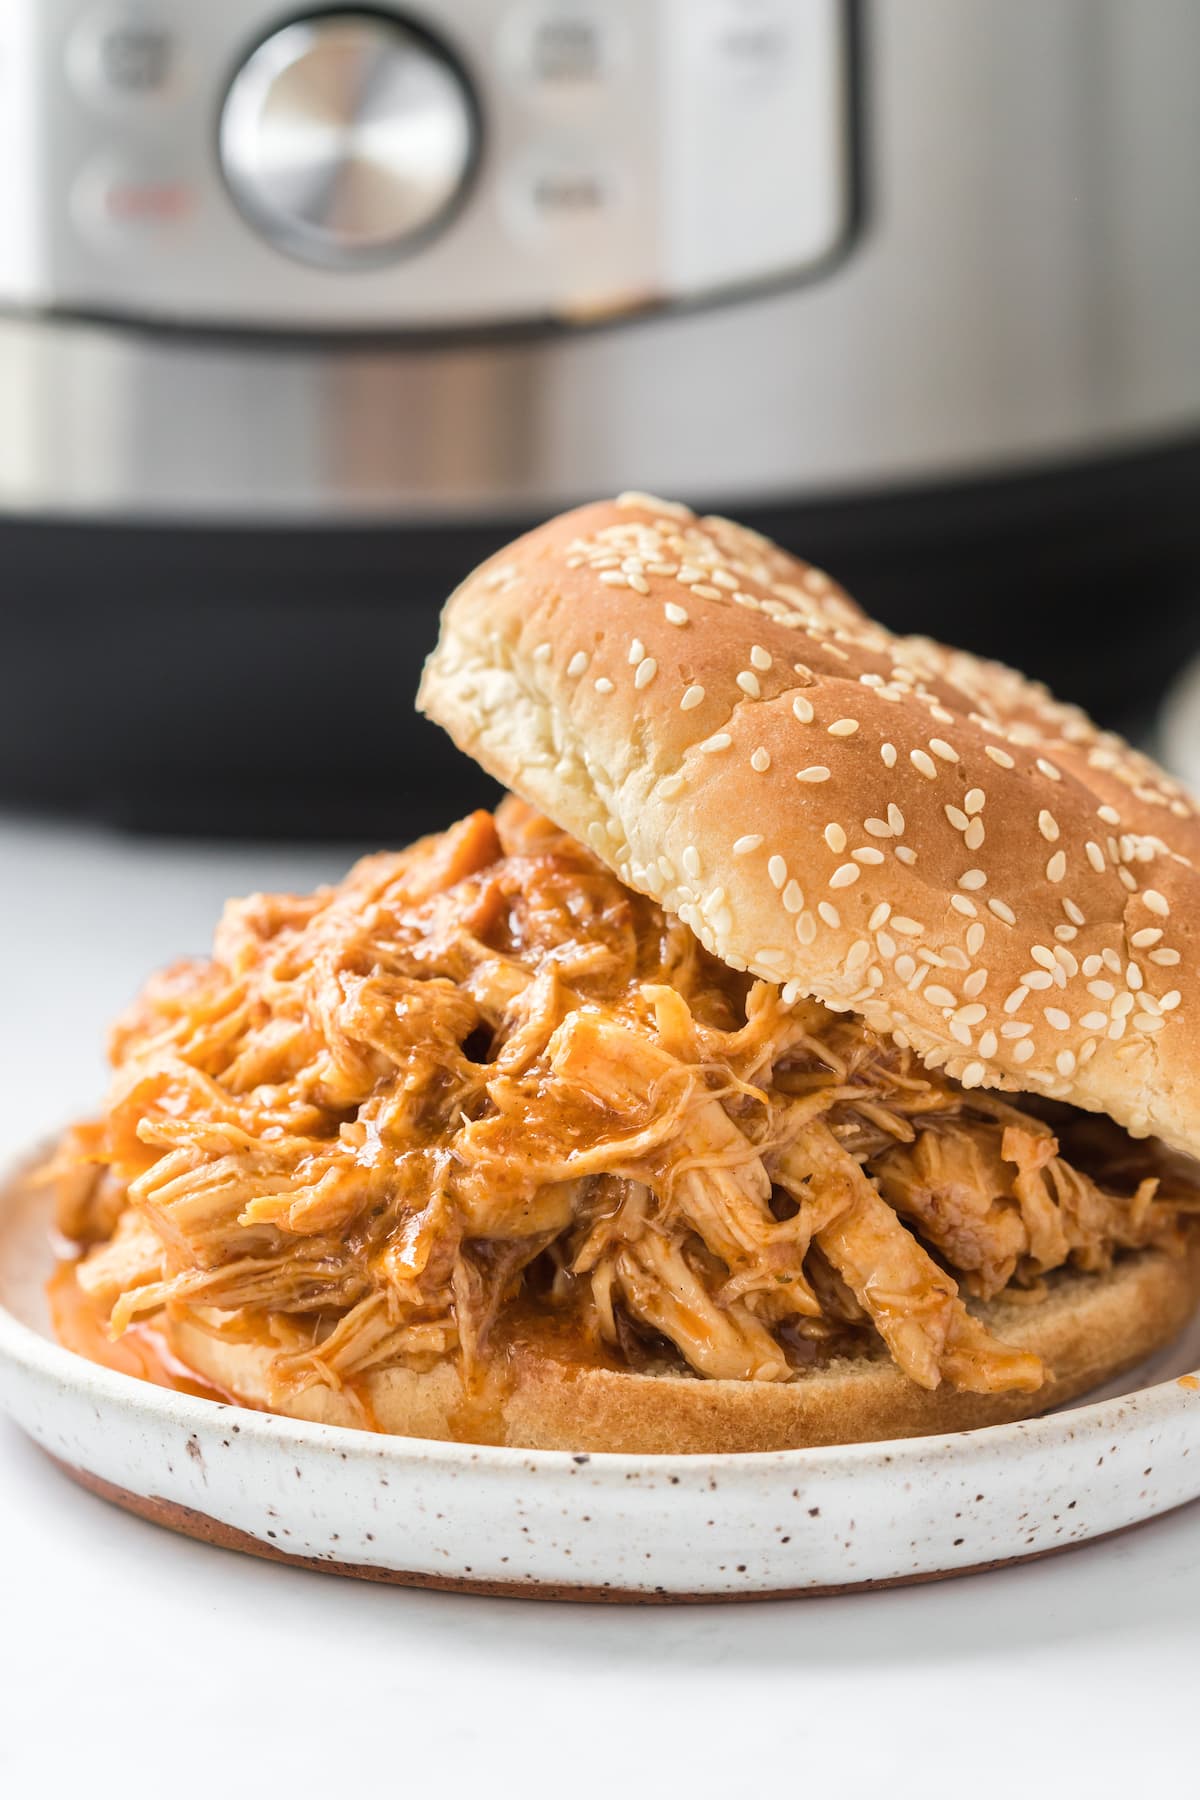 bbq shredded chicken in a sesame seed bun in front of an instant pot on a plate on a table